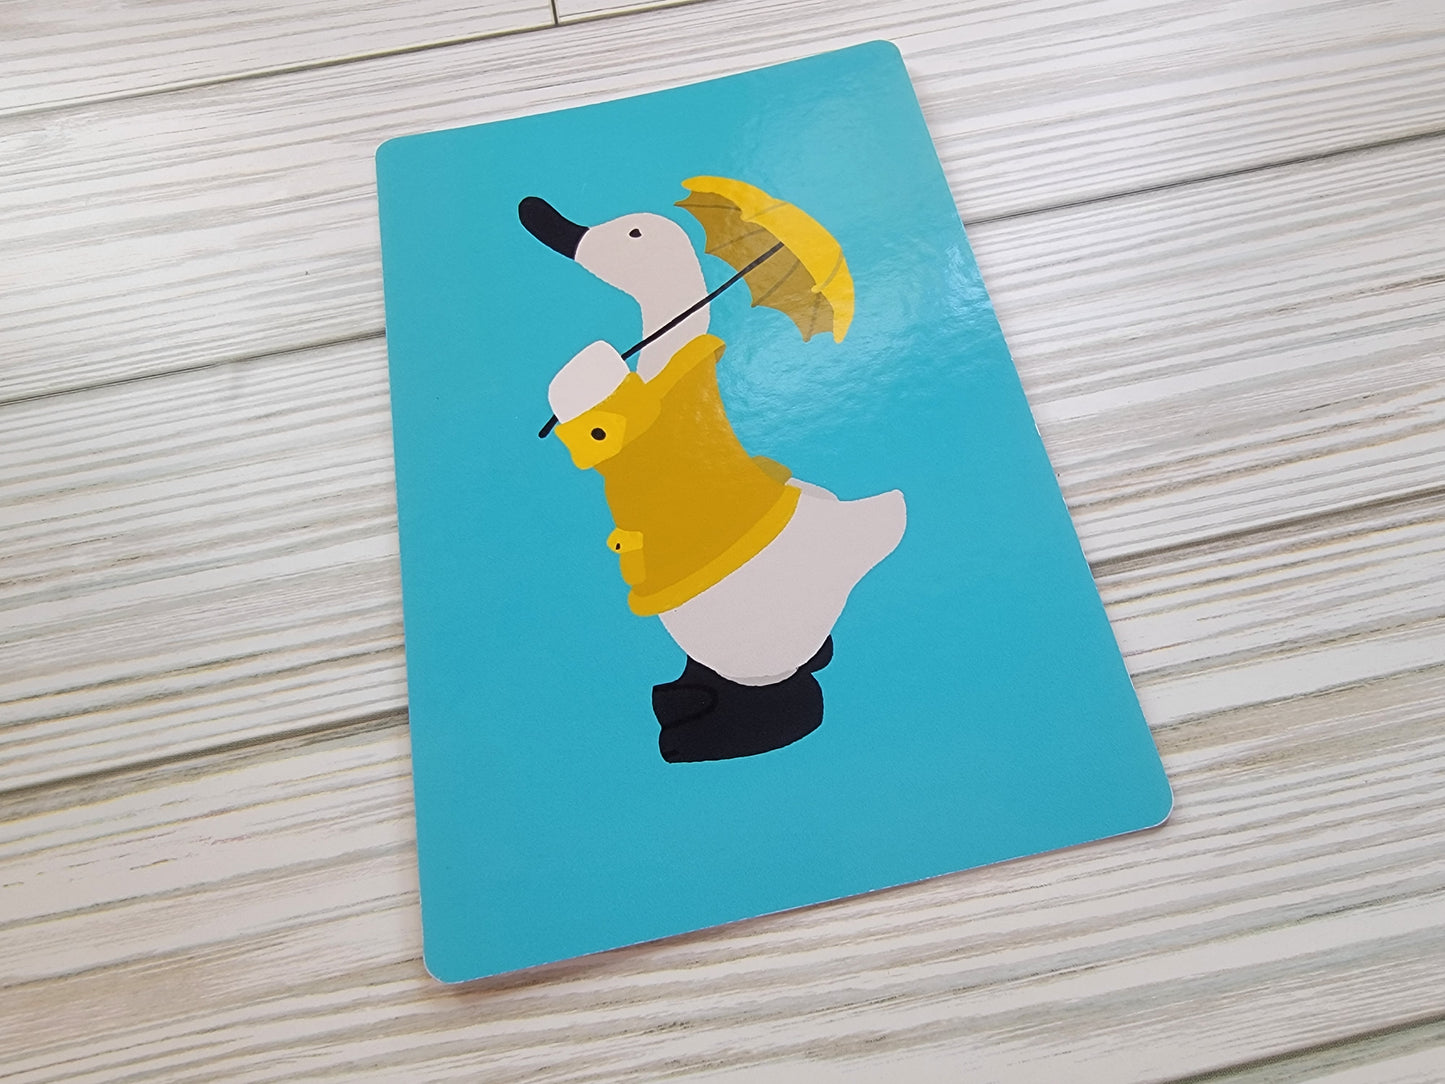 Copy of Duck in a Yellow Rain Coat with Umbrella Postcard - Angled Front Shot